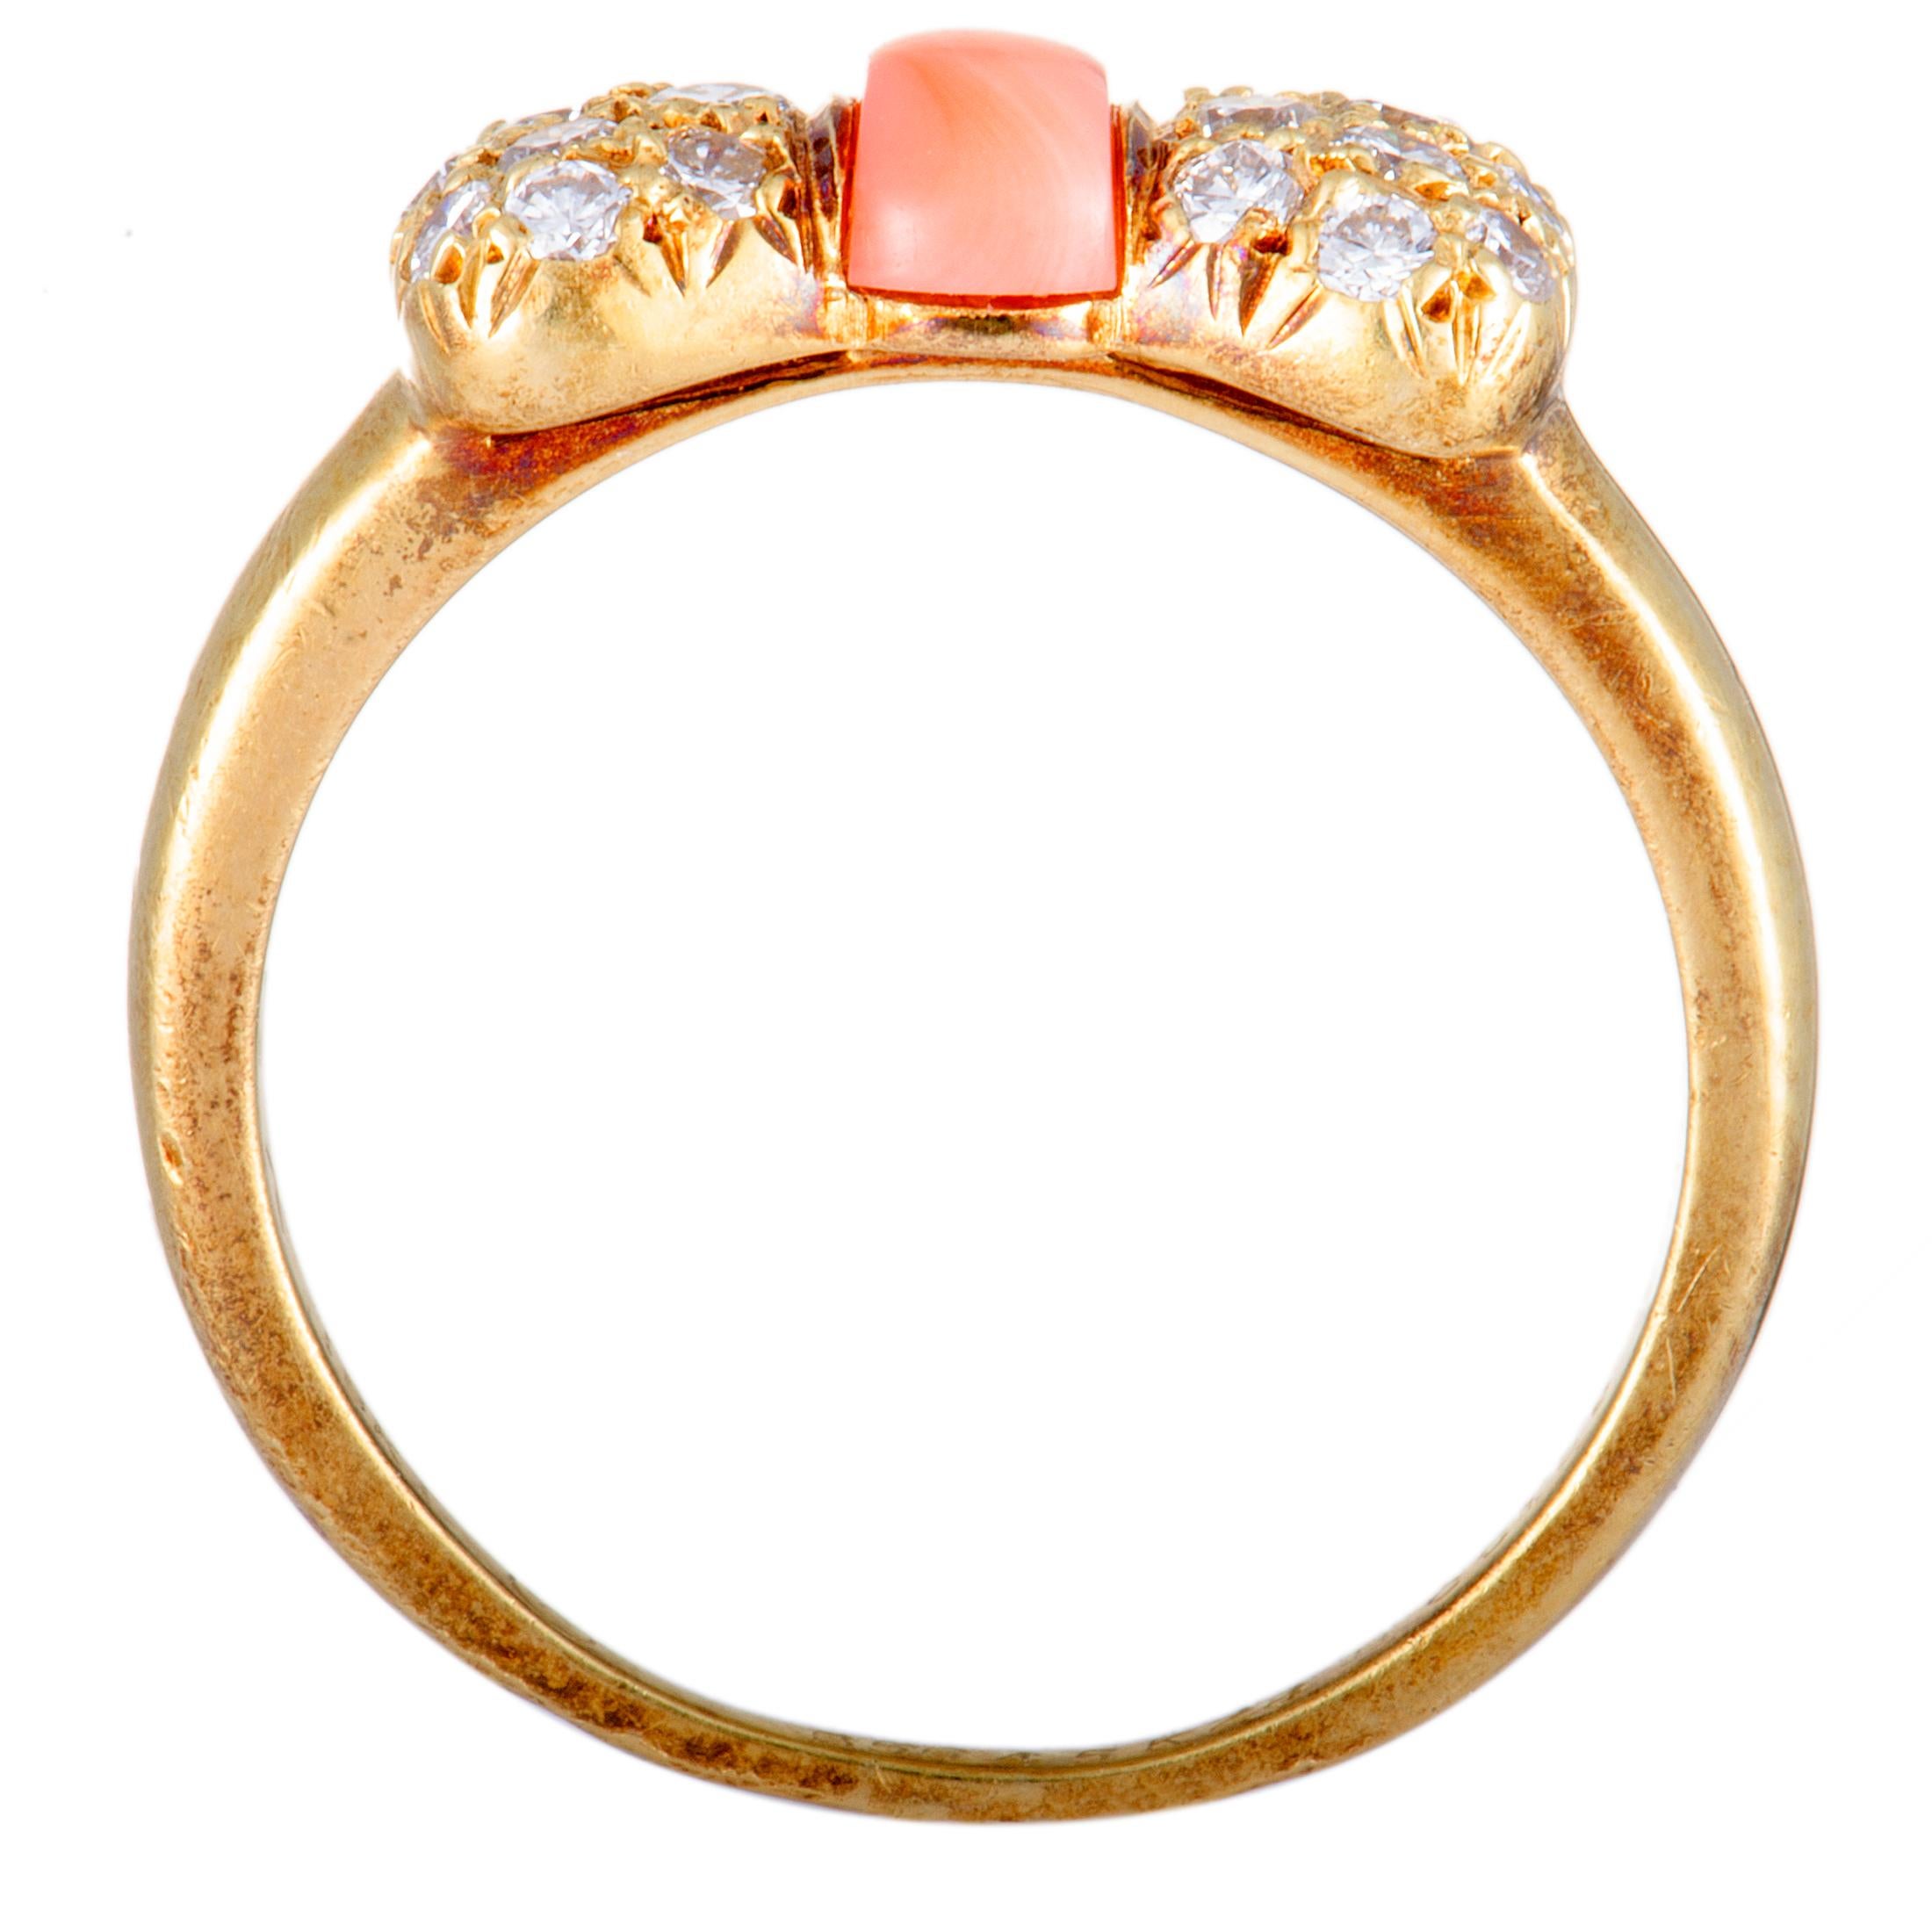 Designed in an exceptionally charming manner, this gorgeous vintage ring from Van Cleef & Arpels boasts a compellingly feminine appeal. The ring is beautifully made of 18K yellow gold and embellished with a sublime coral and with dazzling diamonds